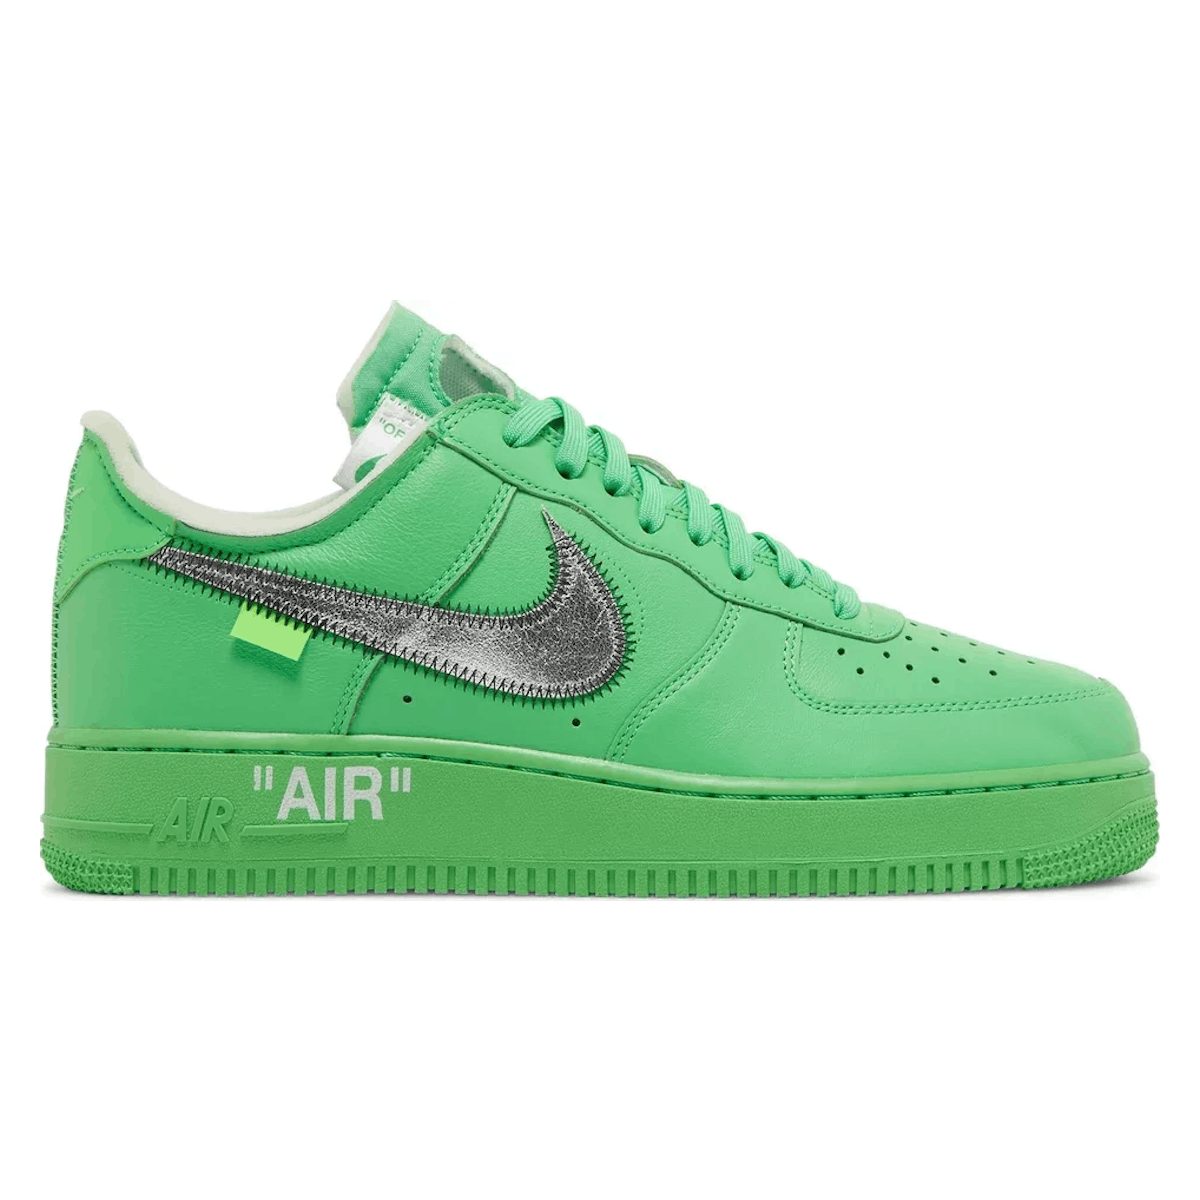 Off-White x Nike Air Force 1 Low "Light Green Spark"